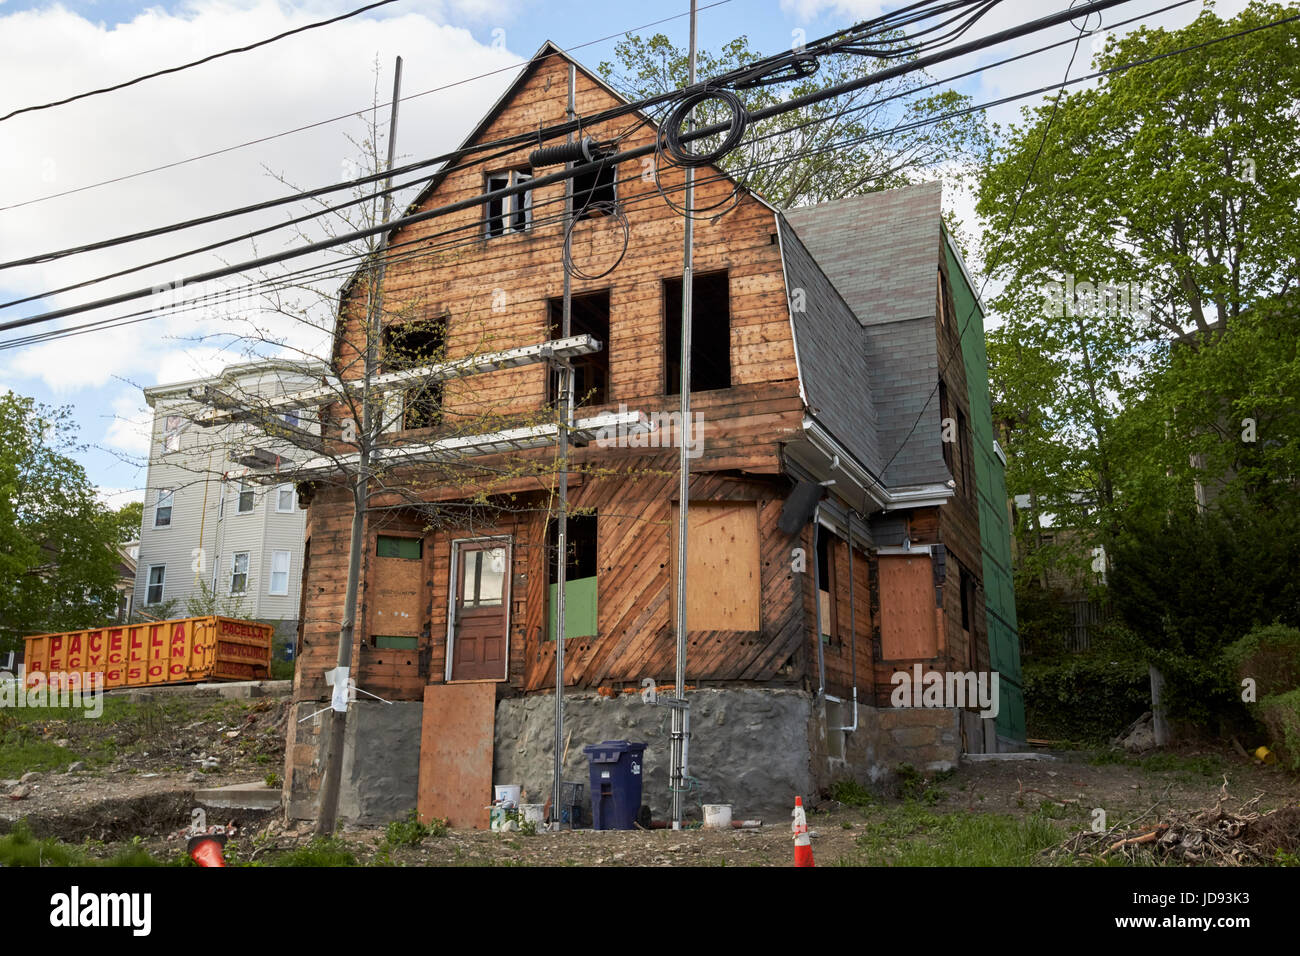 building preservation work ongoing on wooden three storey house savin hill dorchester Boston USA Stock Photo